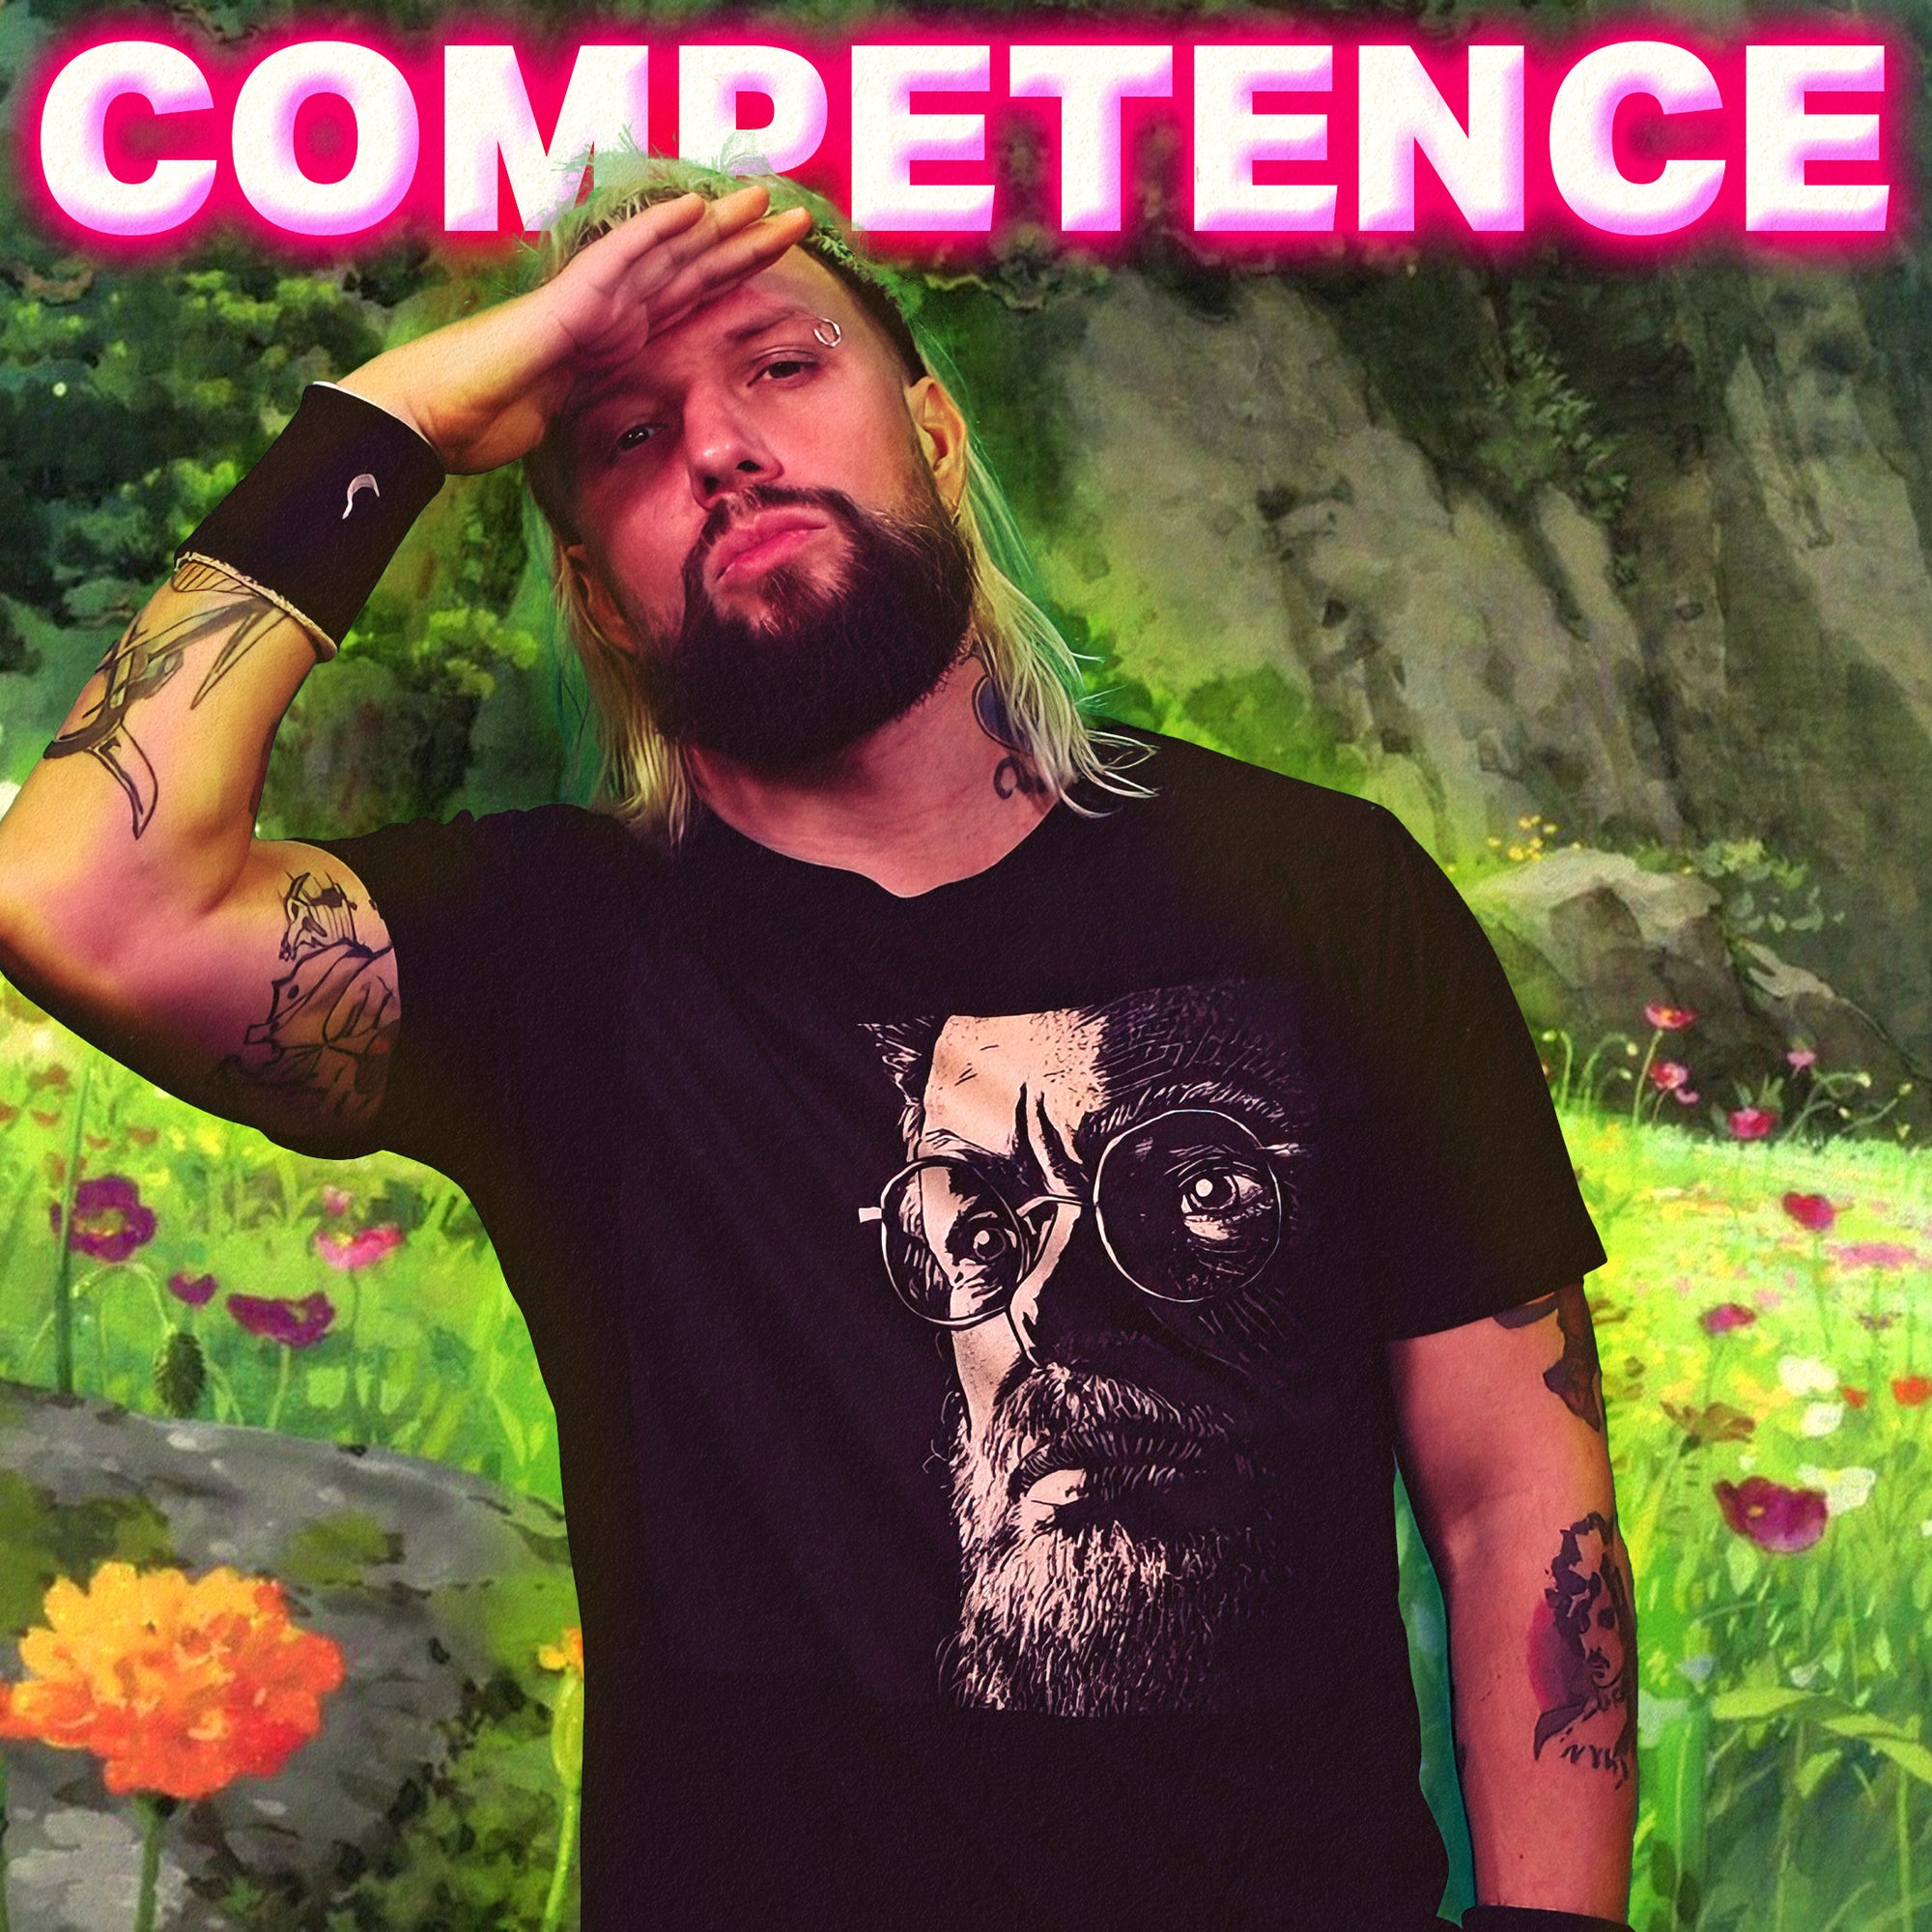 COMPETENCE - MEANINGSTREAM 528 | STREAM